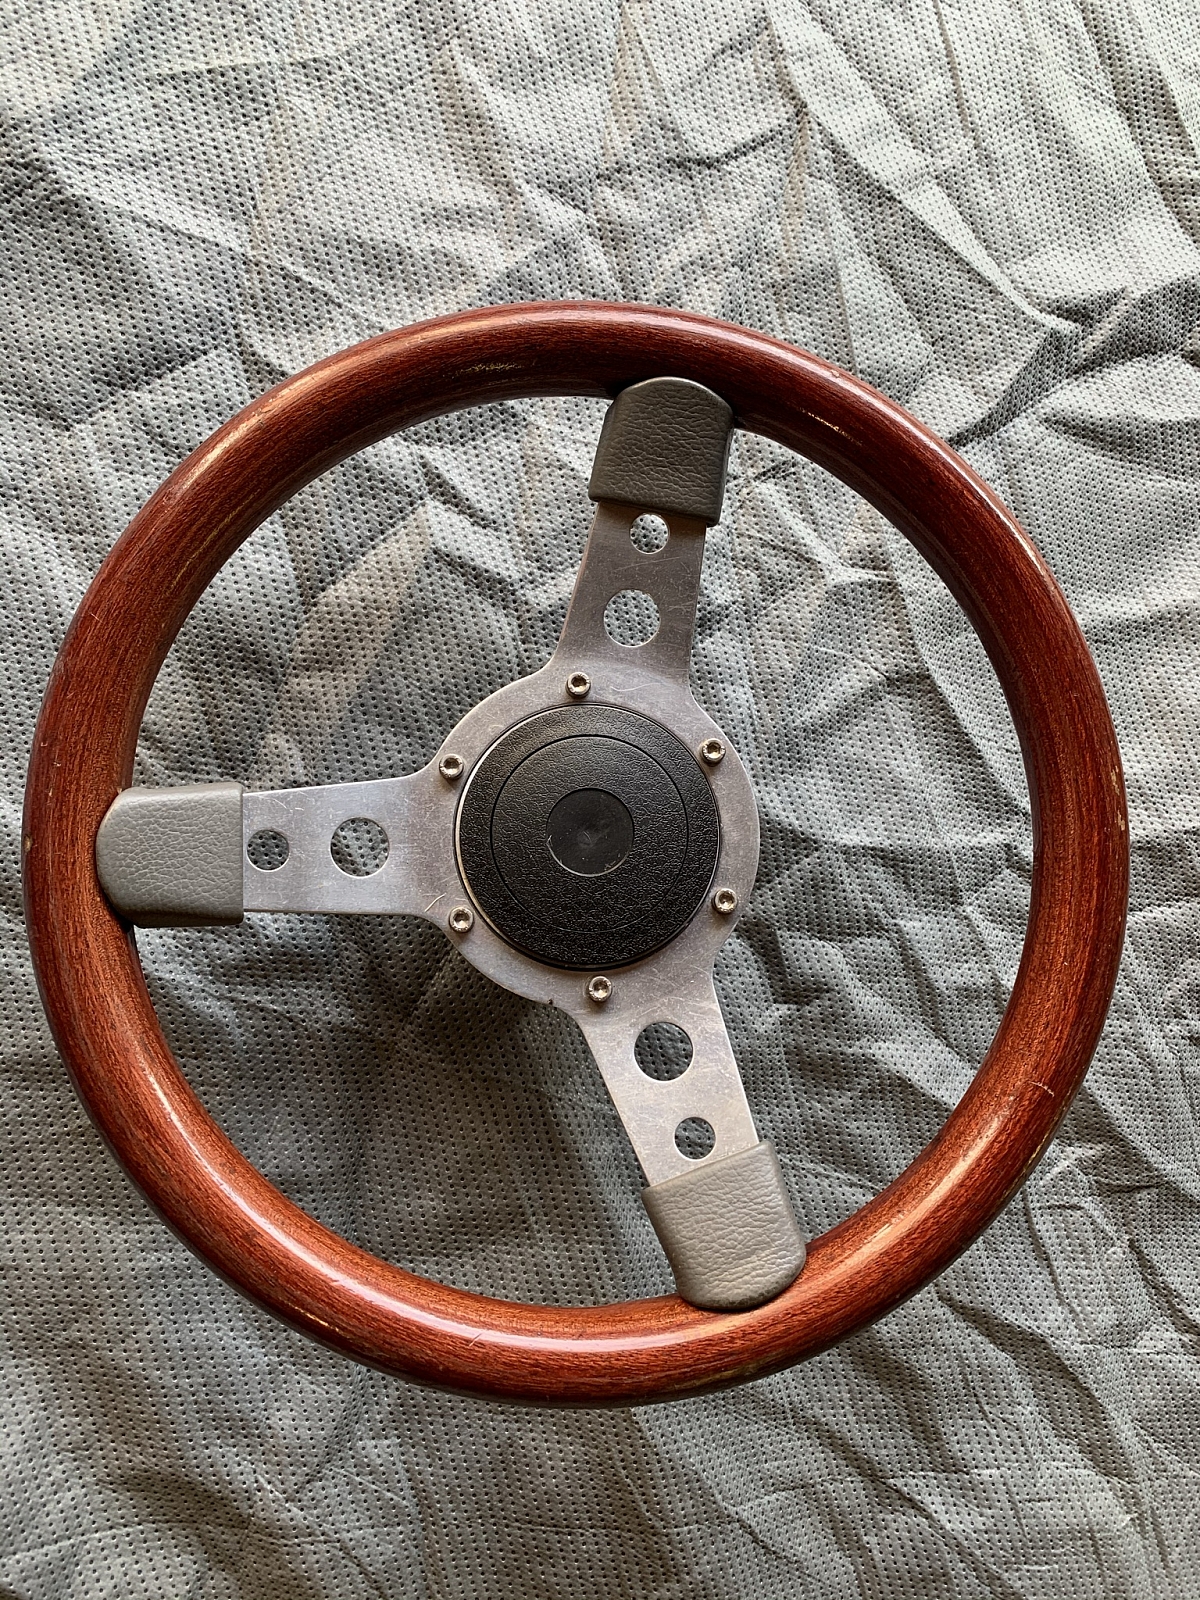 Reduced price: Classic alloy wooden rimmed steering wheel